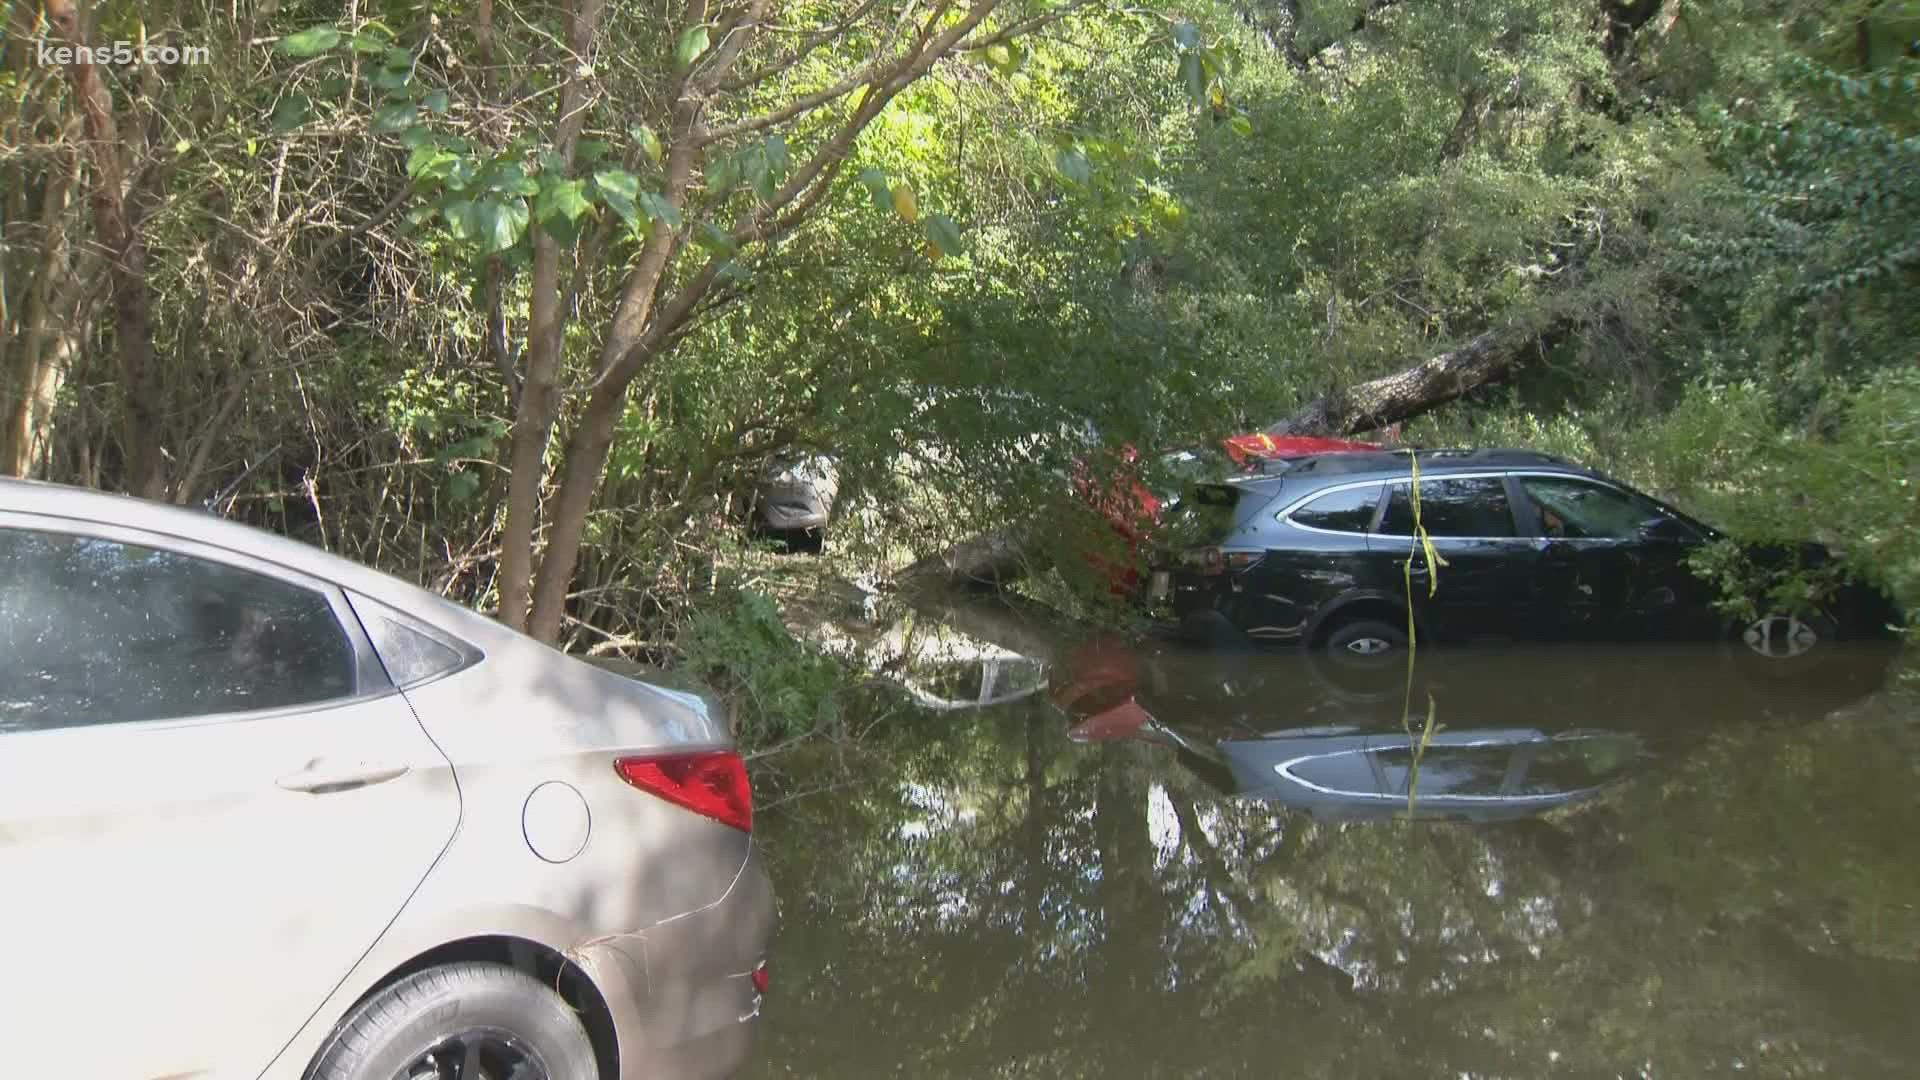 At one point, seven people were stranded on the hoods of their cars before they were rescued by first responders.